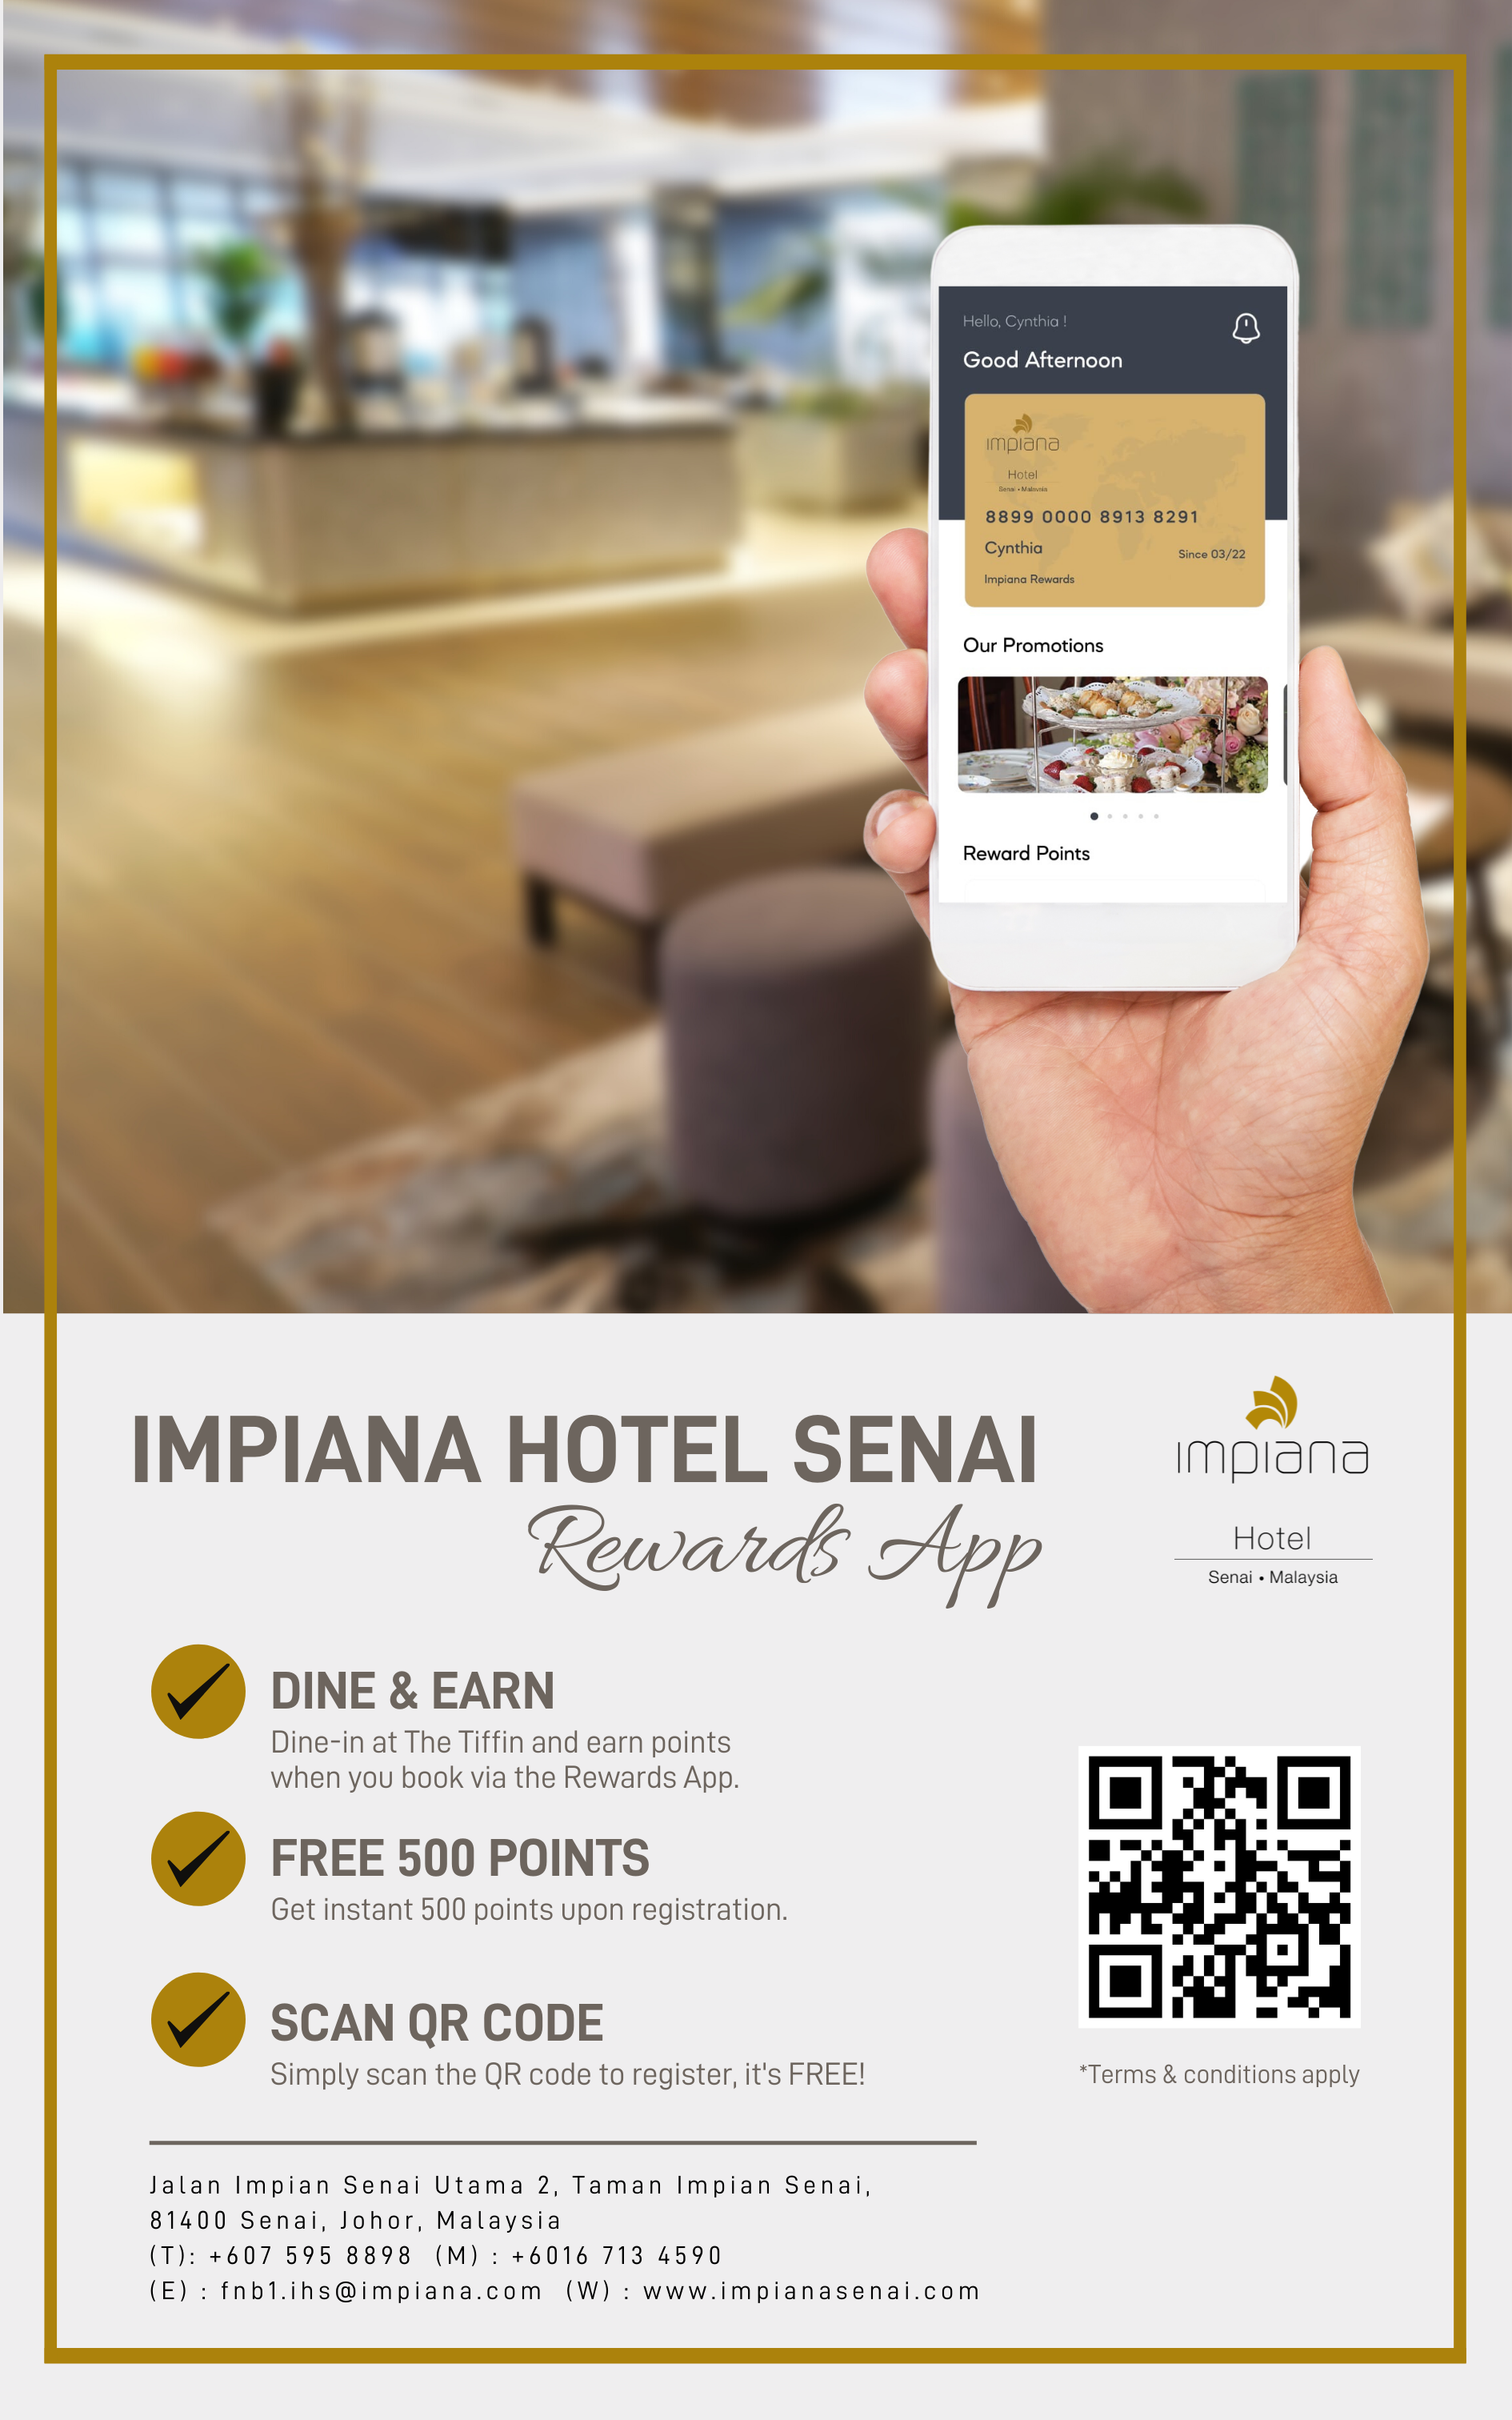 Impiana Hotel Senai Launches Rewards App & Unveils Vision to Be an Everyday App for Everyone